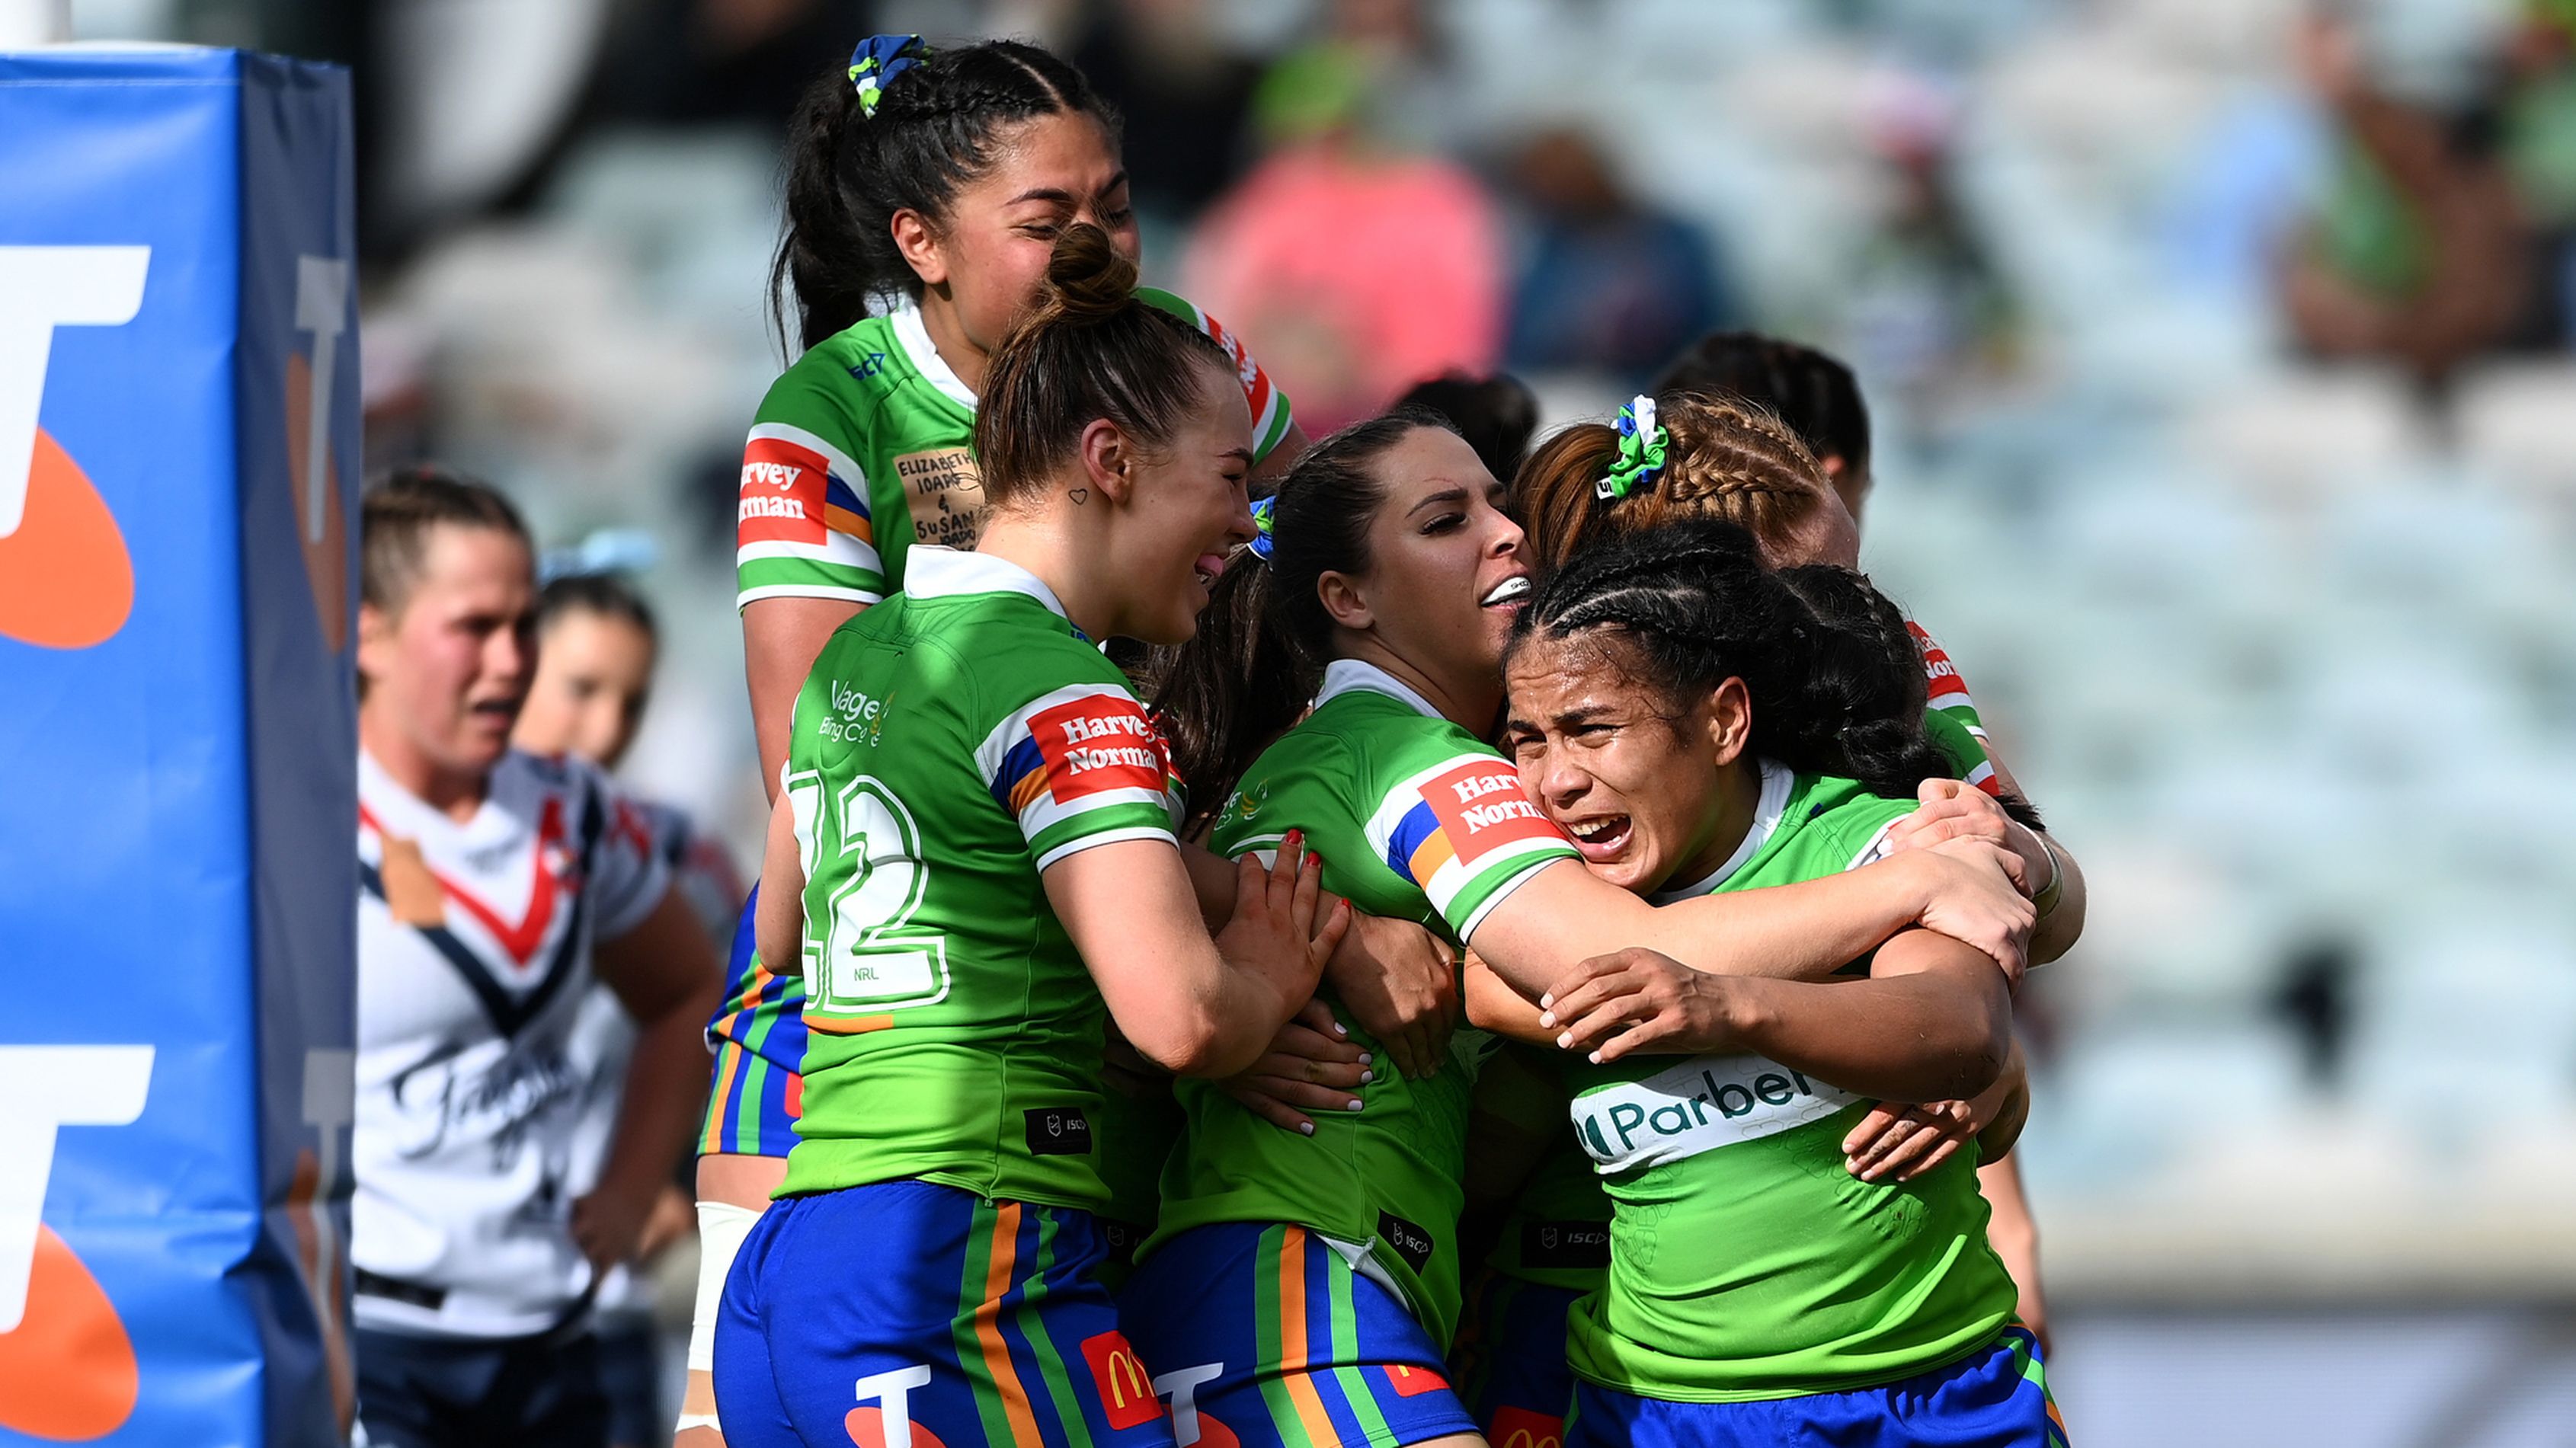 NRLW R2 Canberra Raiders v Sydney Roosters at GIO Stadium,Canberra .Picture: NRL Photos/Gregg Porteous